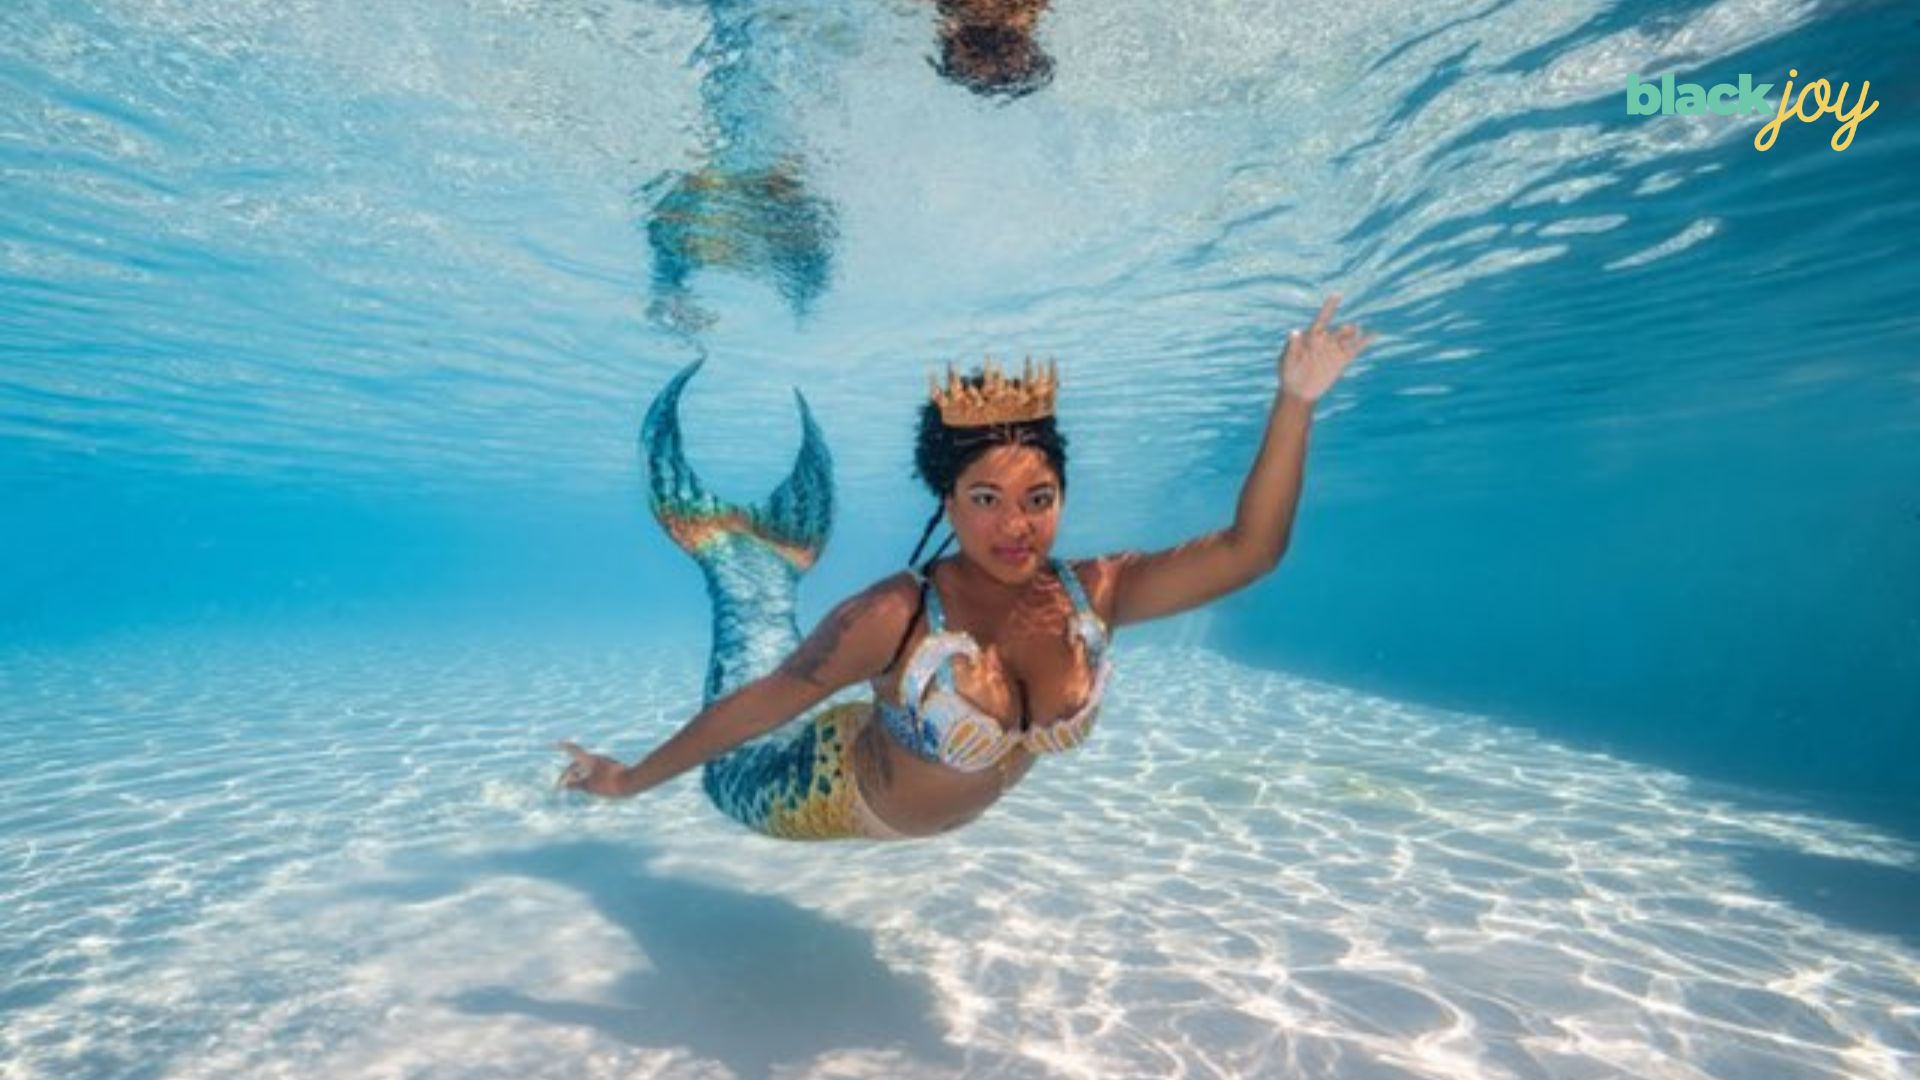 A Florida mermaid is healing Black people's trauma with water